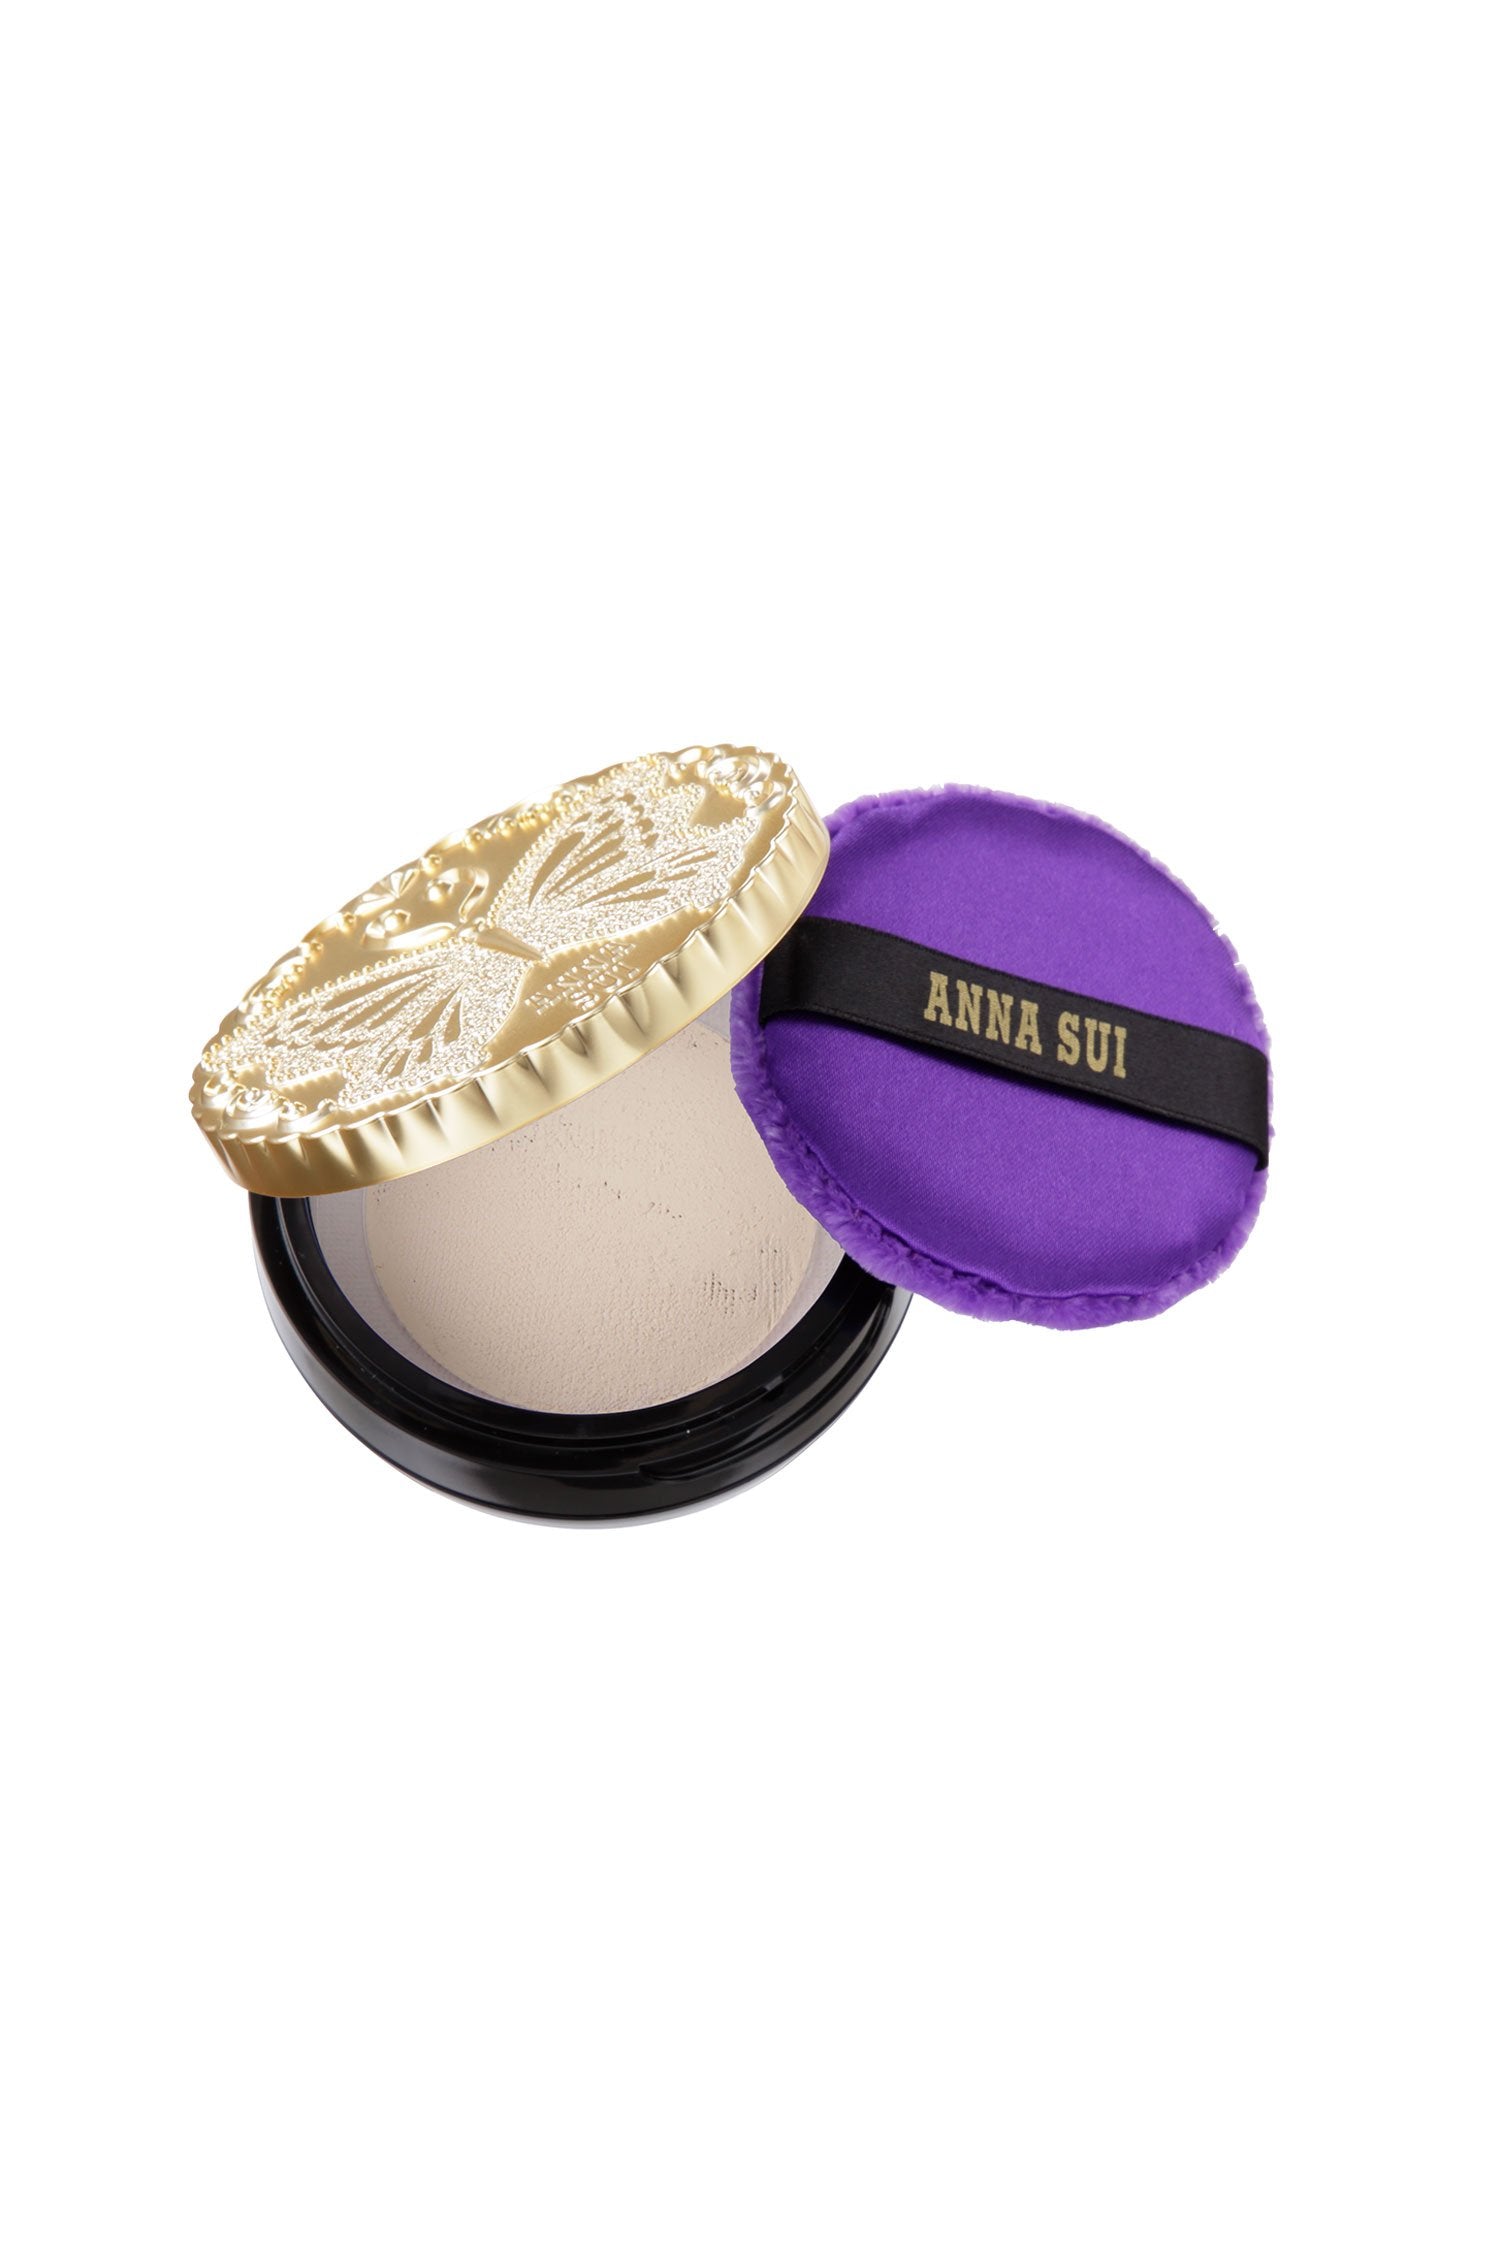 Mini Loose SHINY BEIGE Set, round black case, golden lid, engraved butterfly on top, purple pad